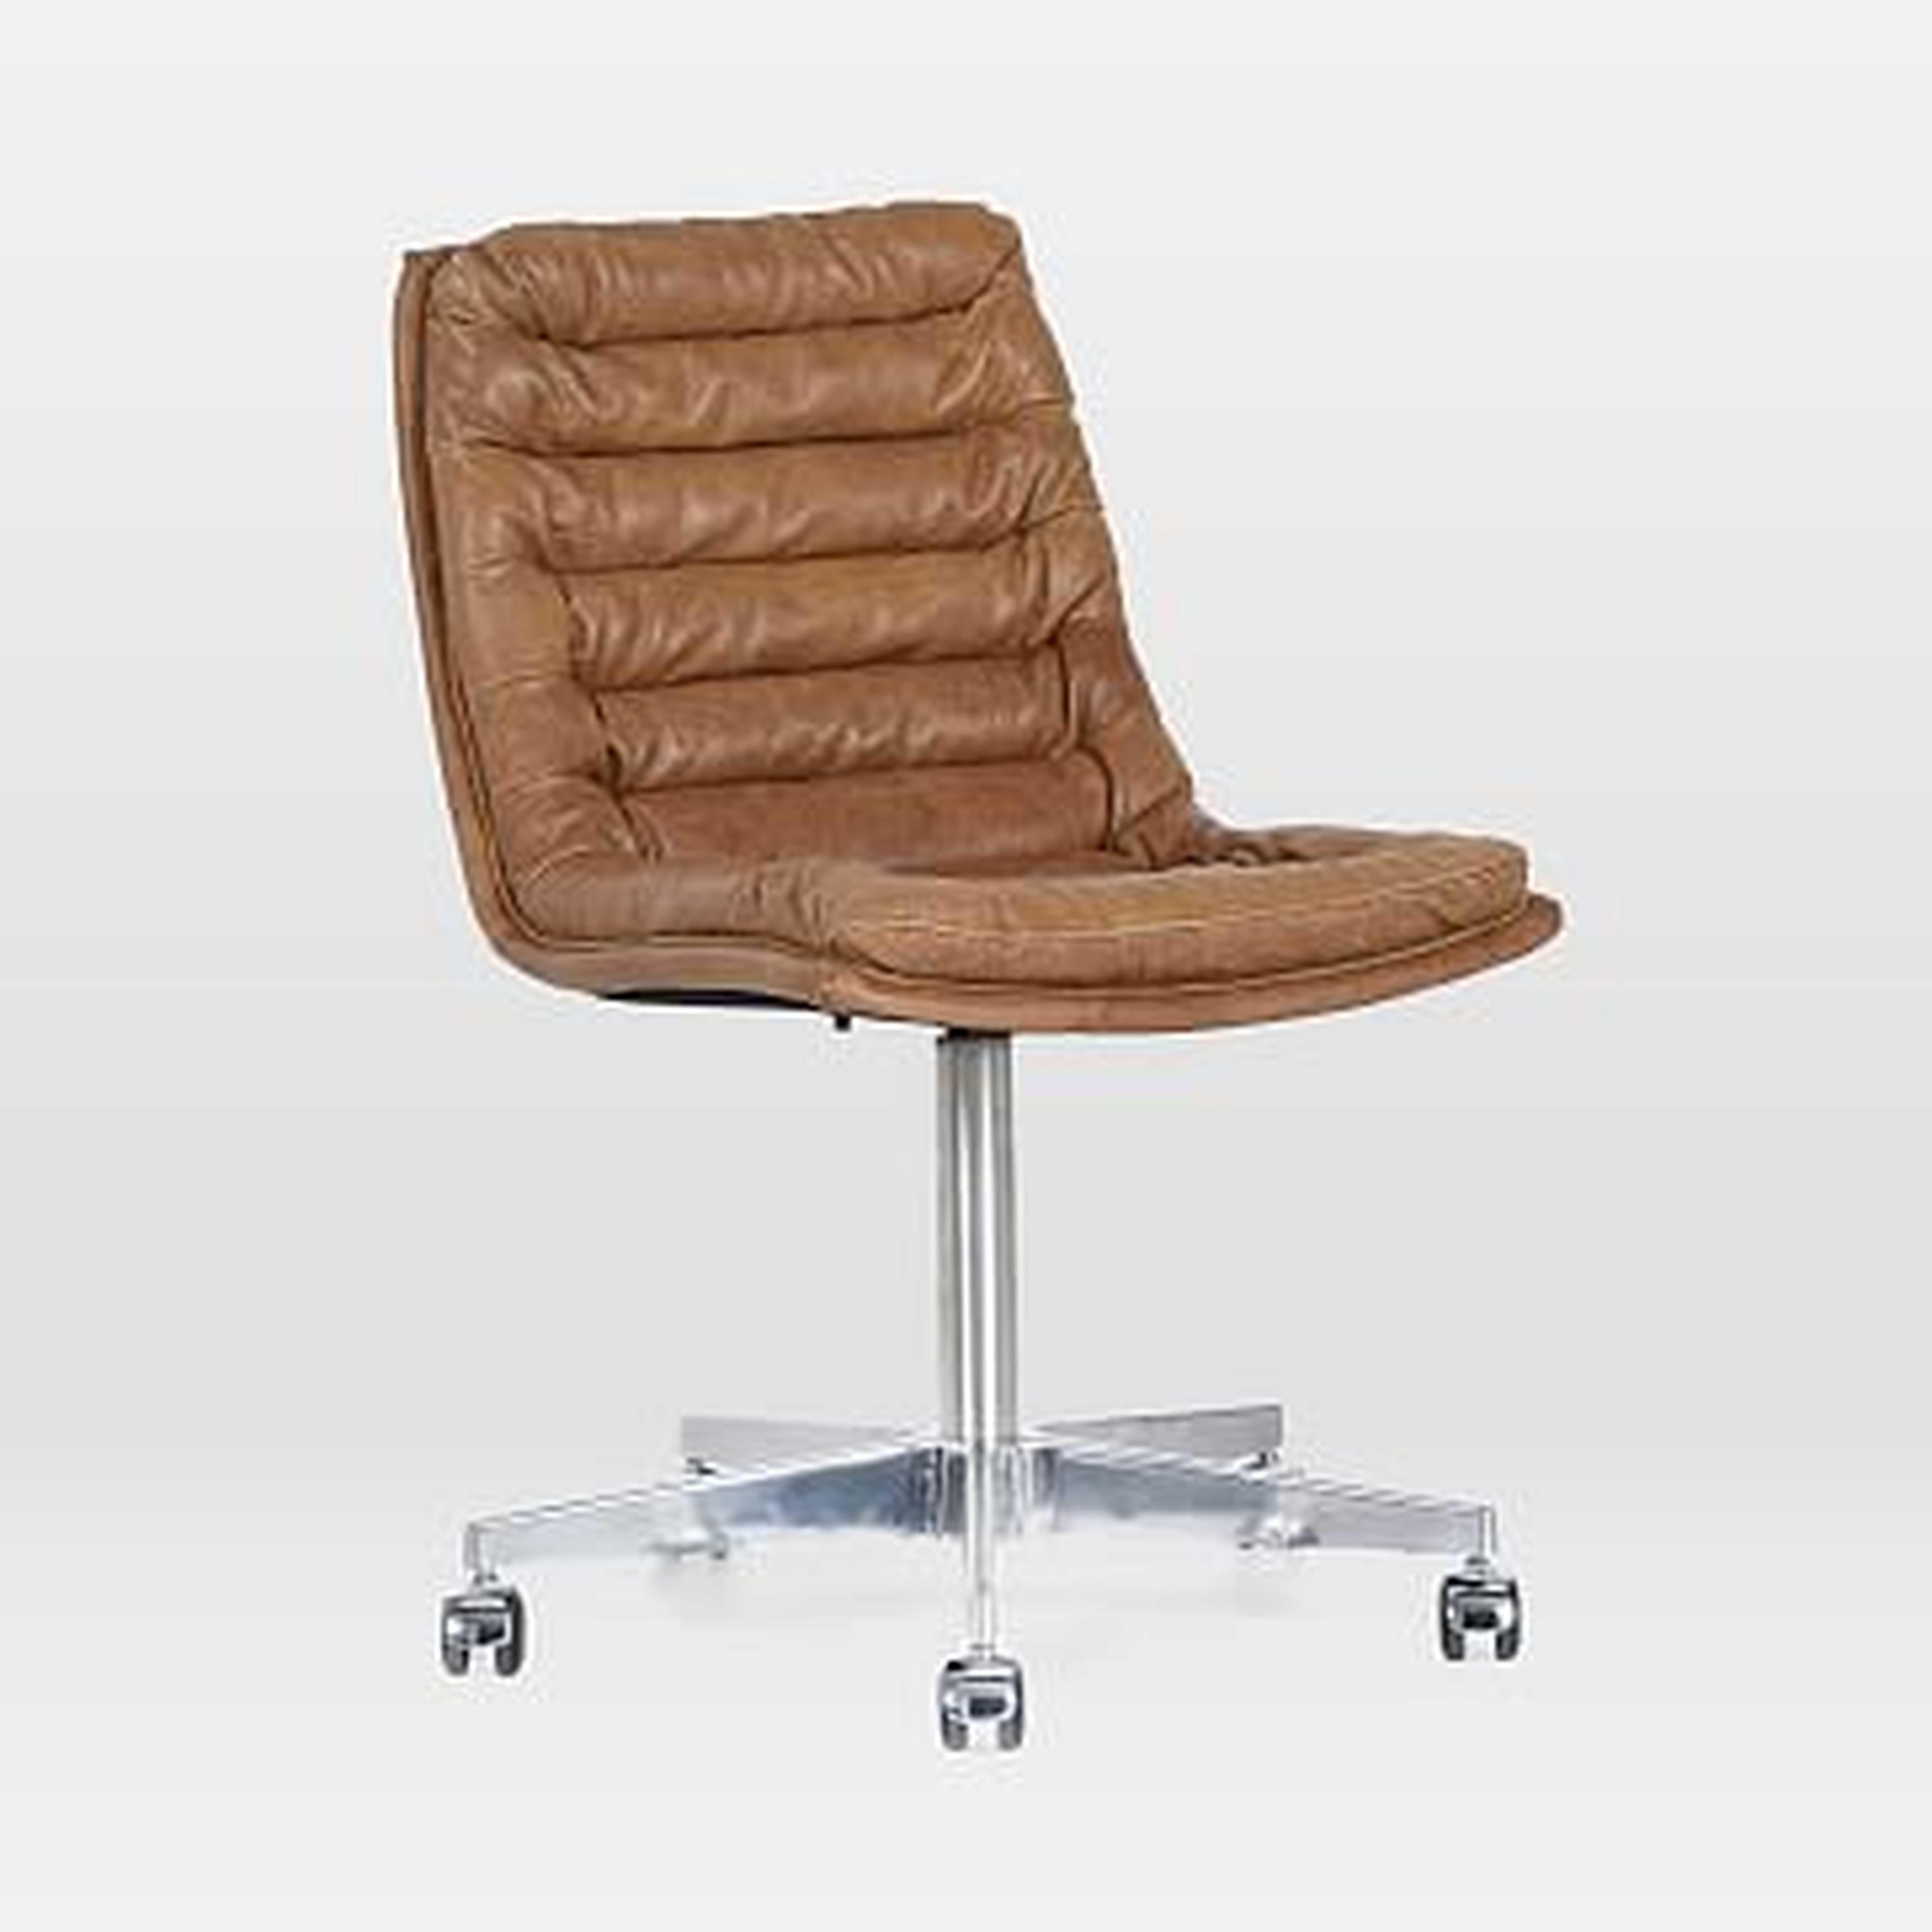 Leather Upholstered Swivel Desk Chair, Pampus Nut - West Elm